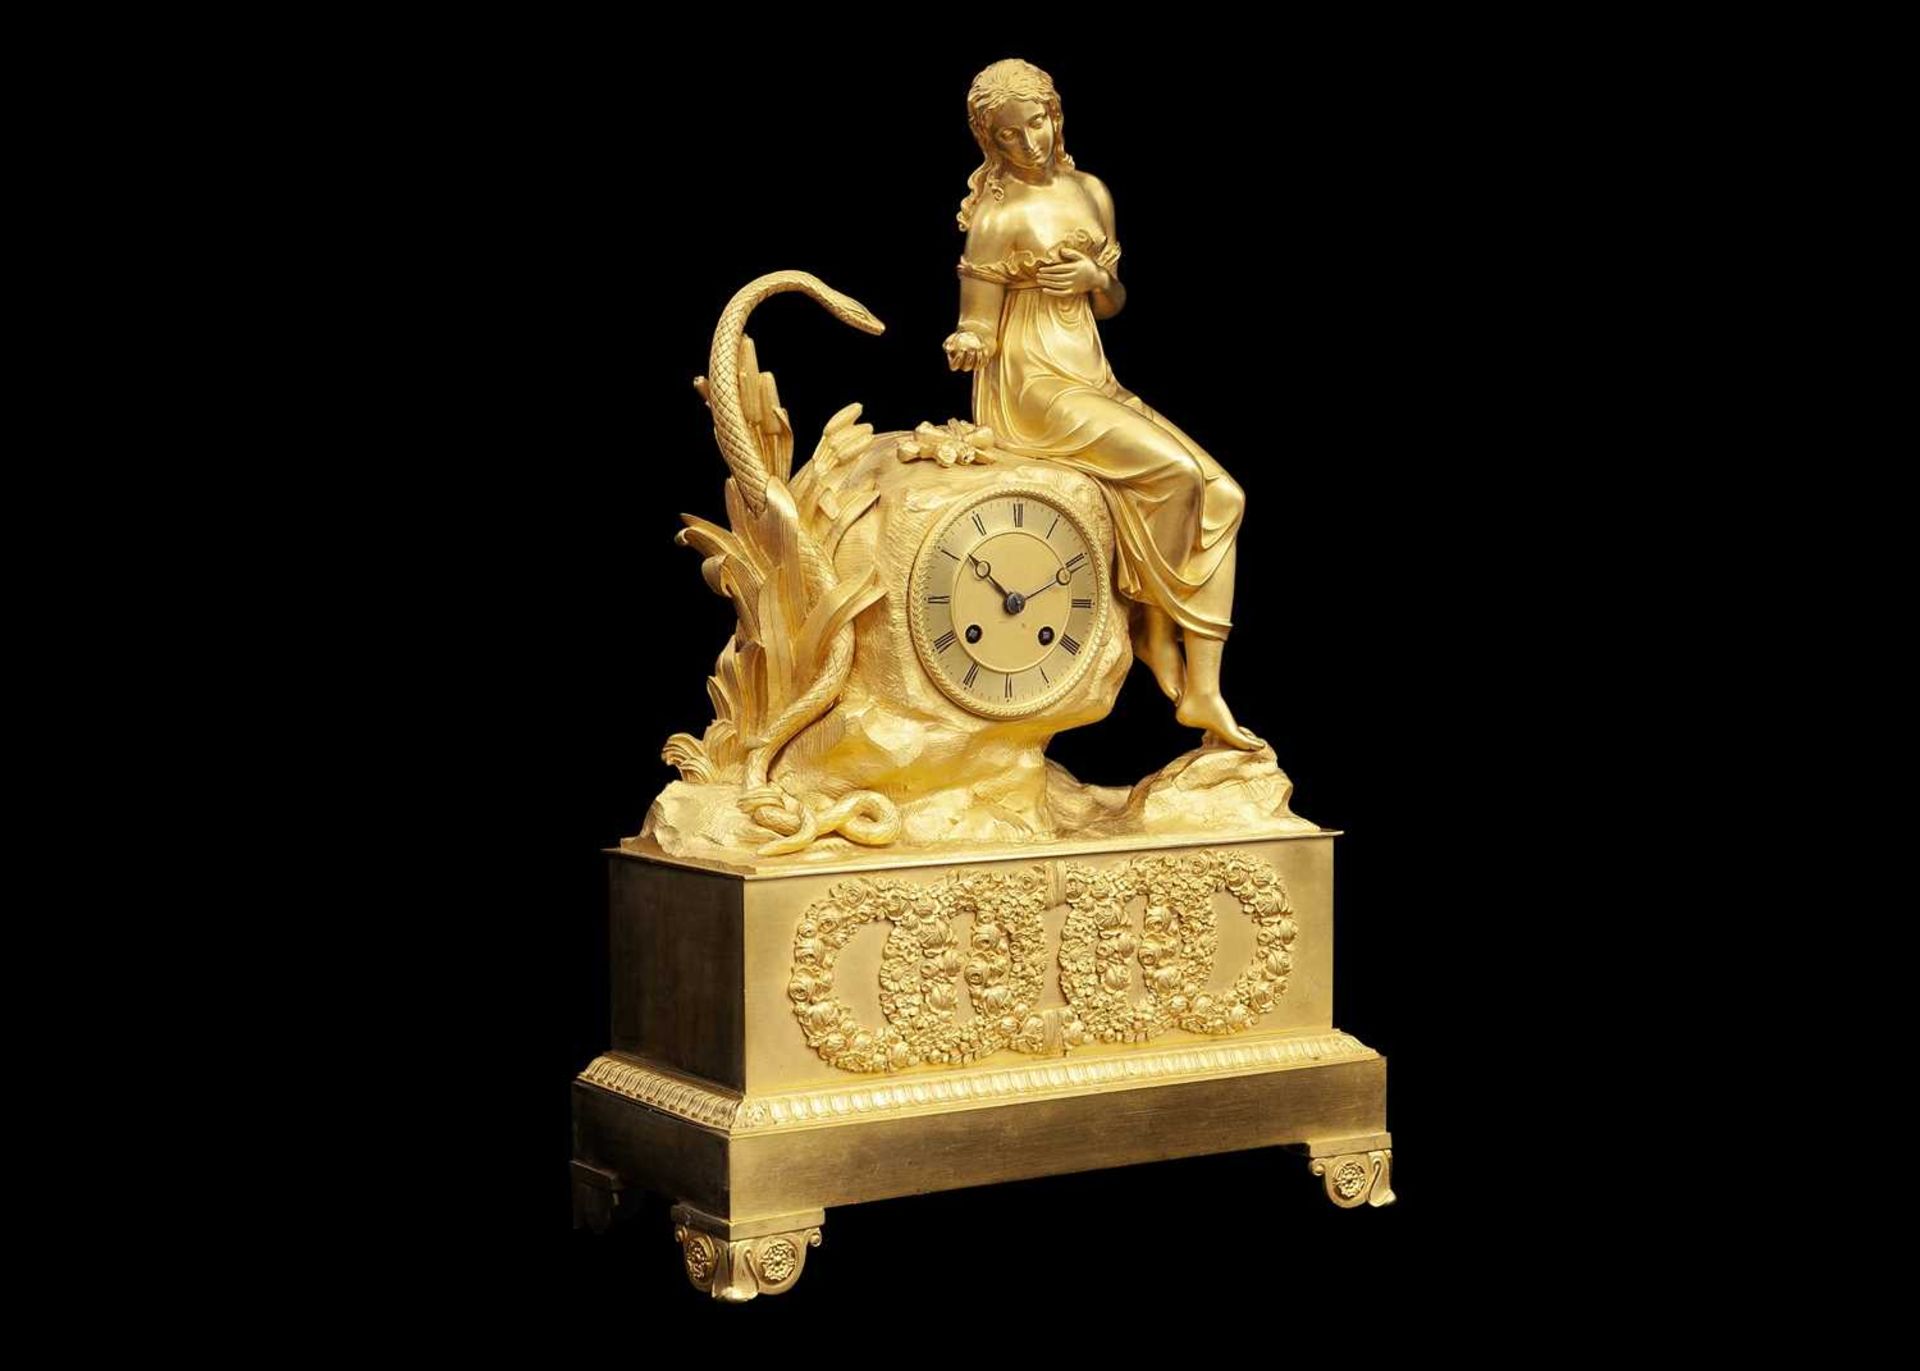 A FINE AND RARE EARLY 19TH CENTURY ORMOLU CLOCK DEPICTING EVE AND THE SERPENT - Image 2 of 4